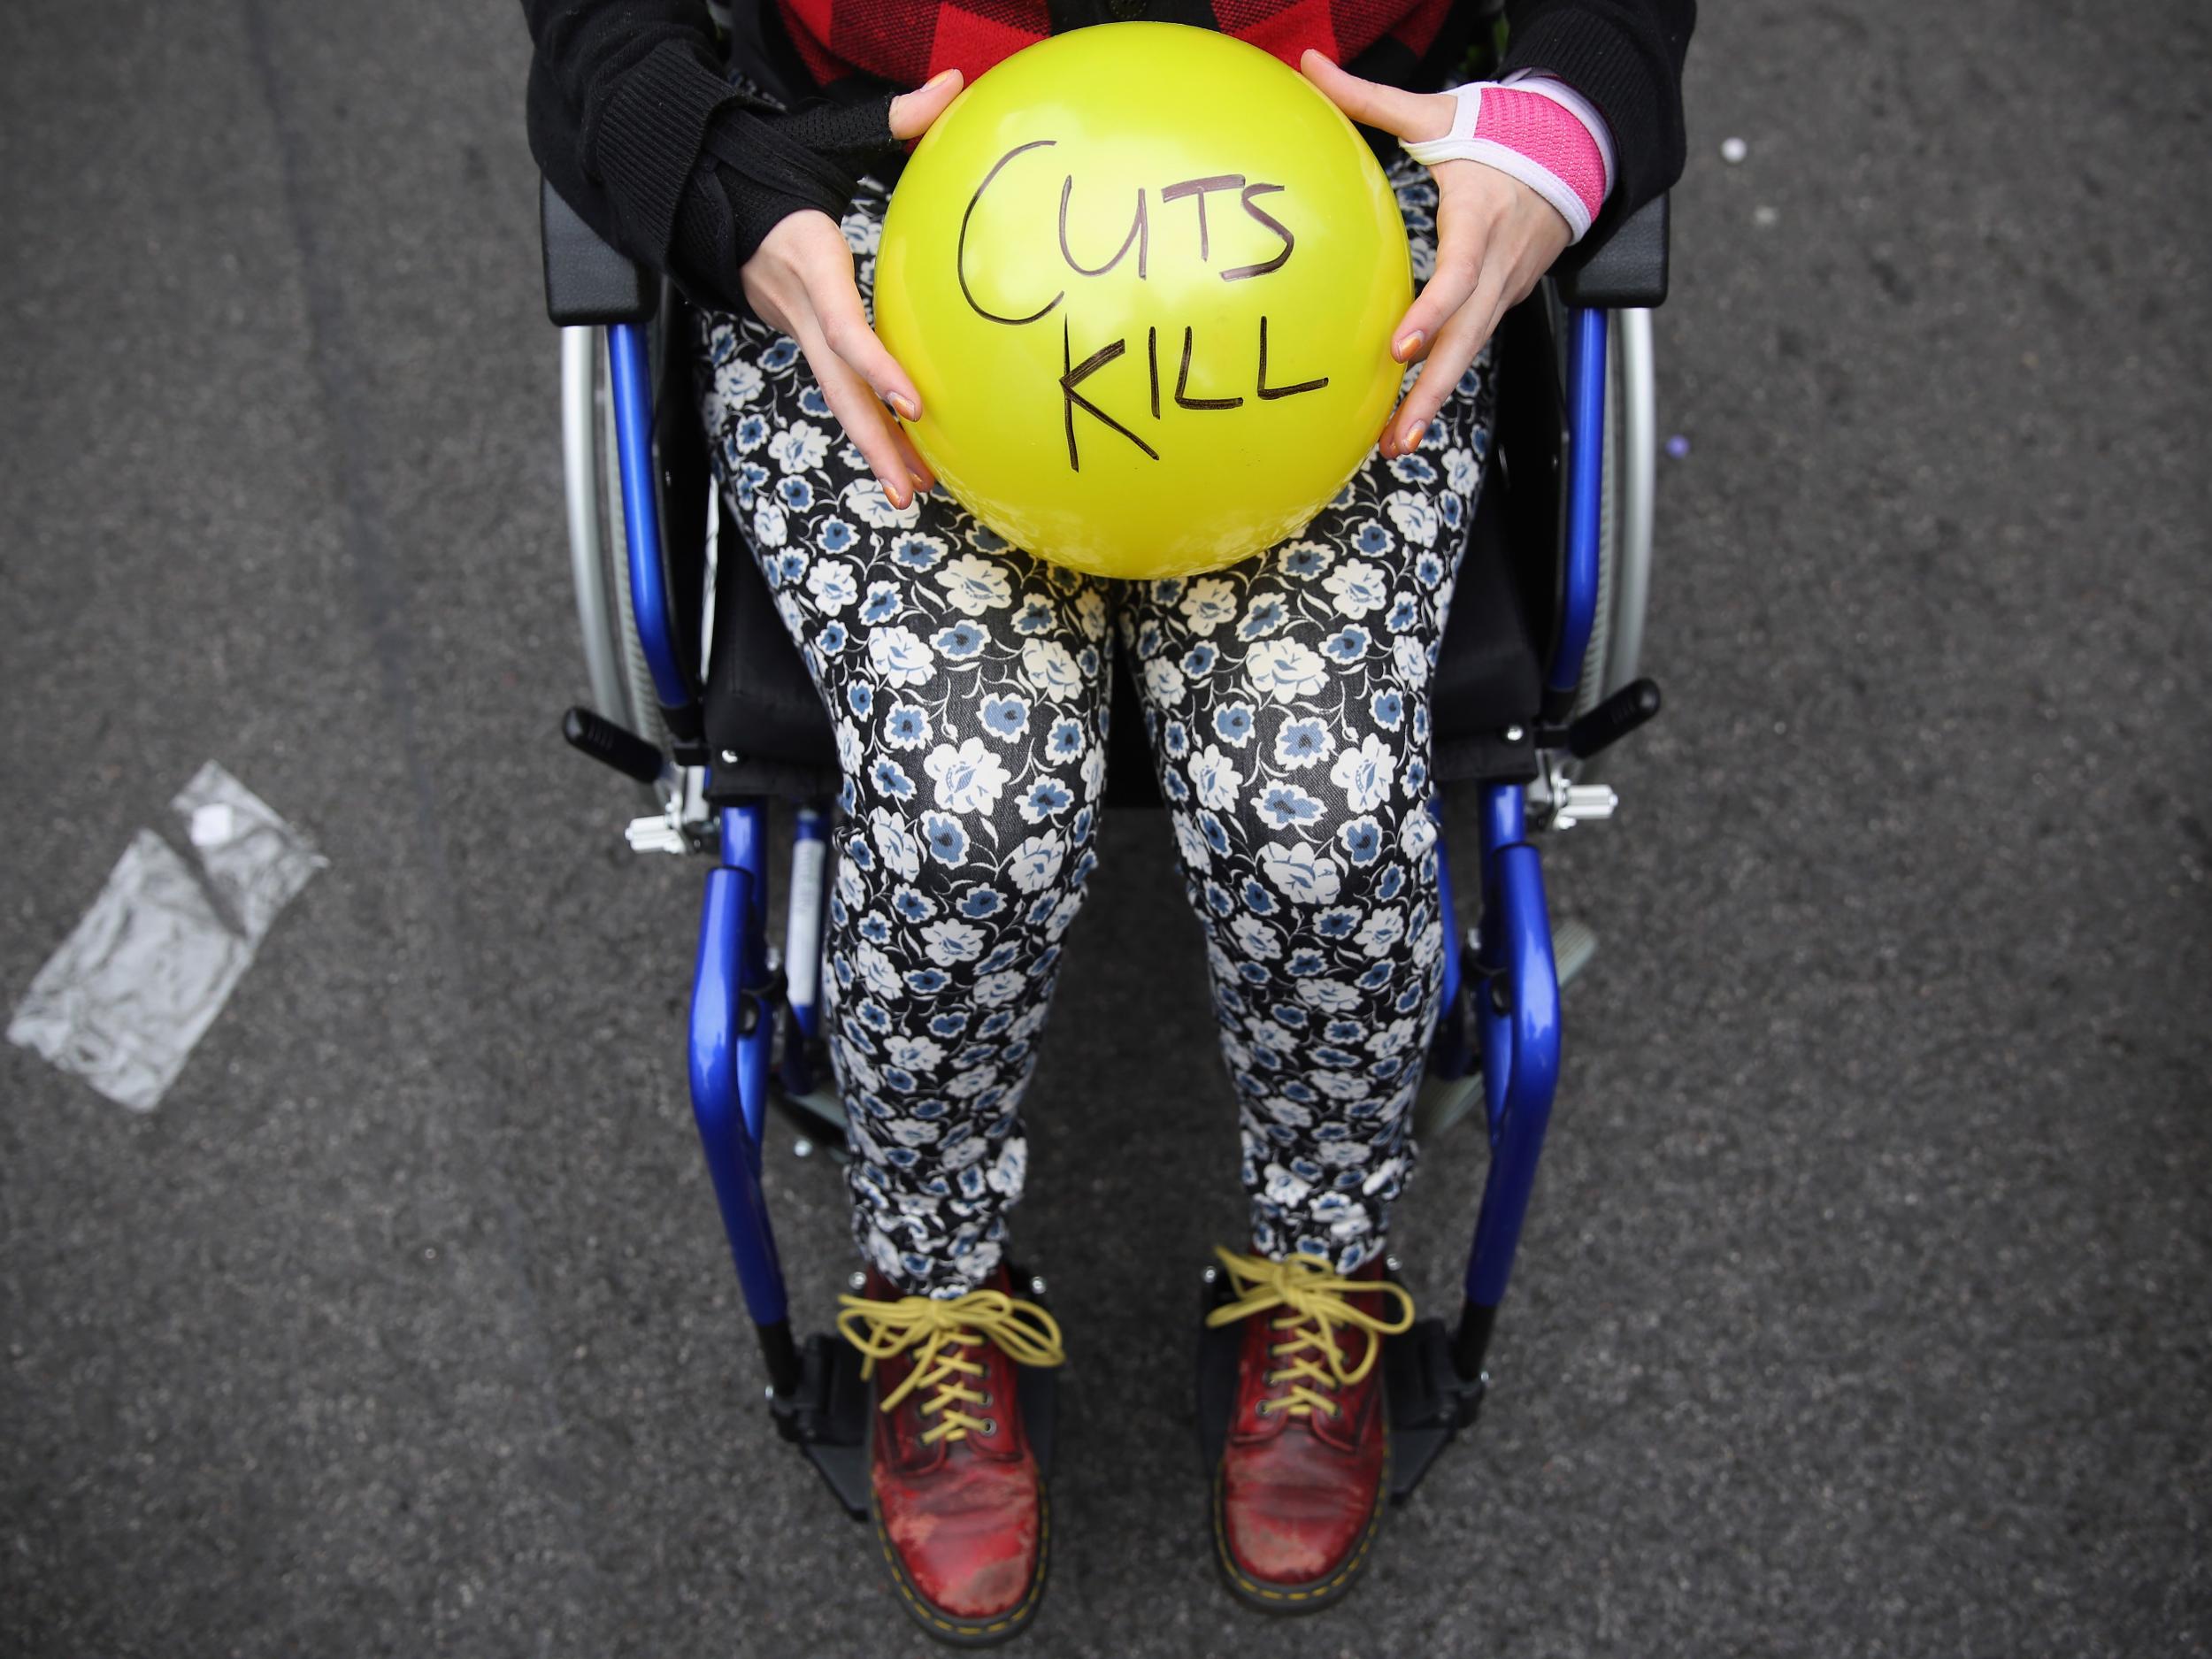 Anti-austerity protesters prepare to throw balls towards Downing Street in protest against the 2015 budget